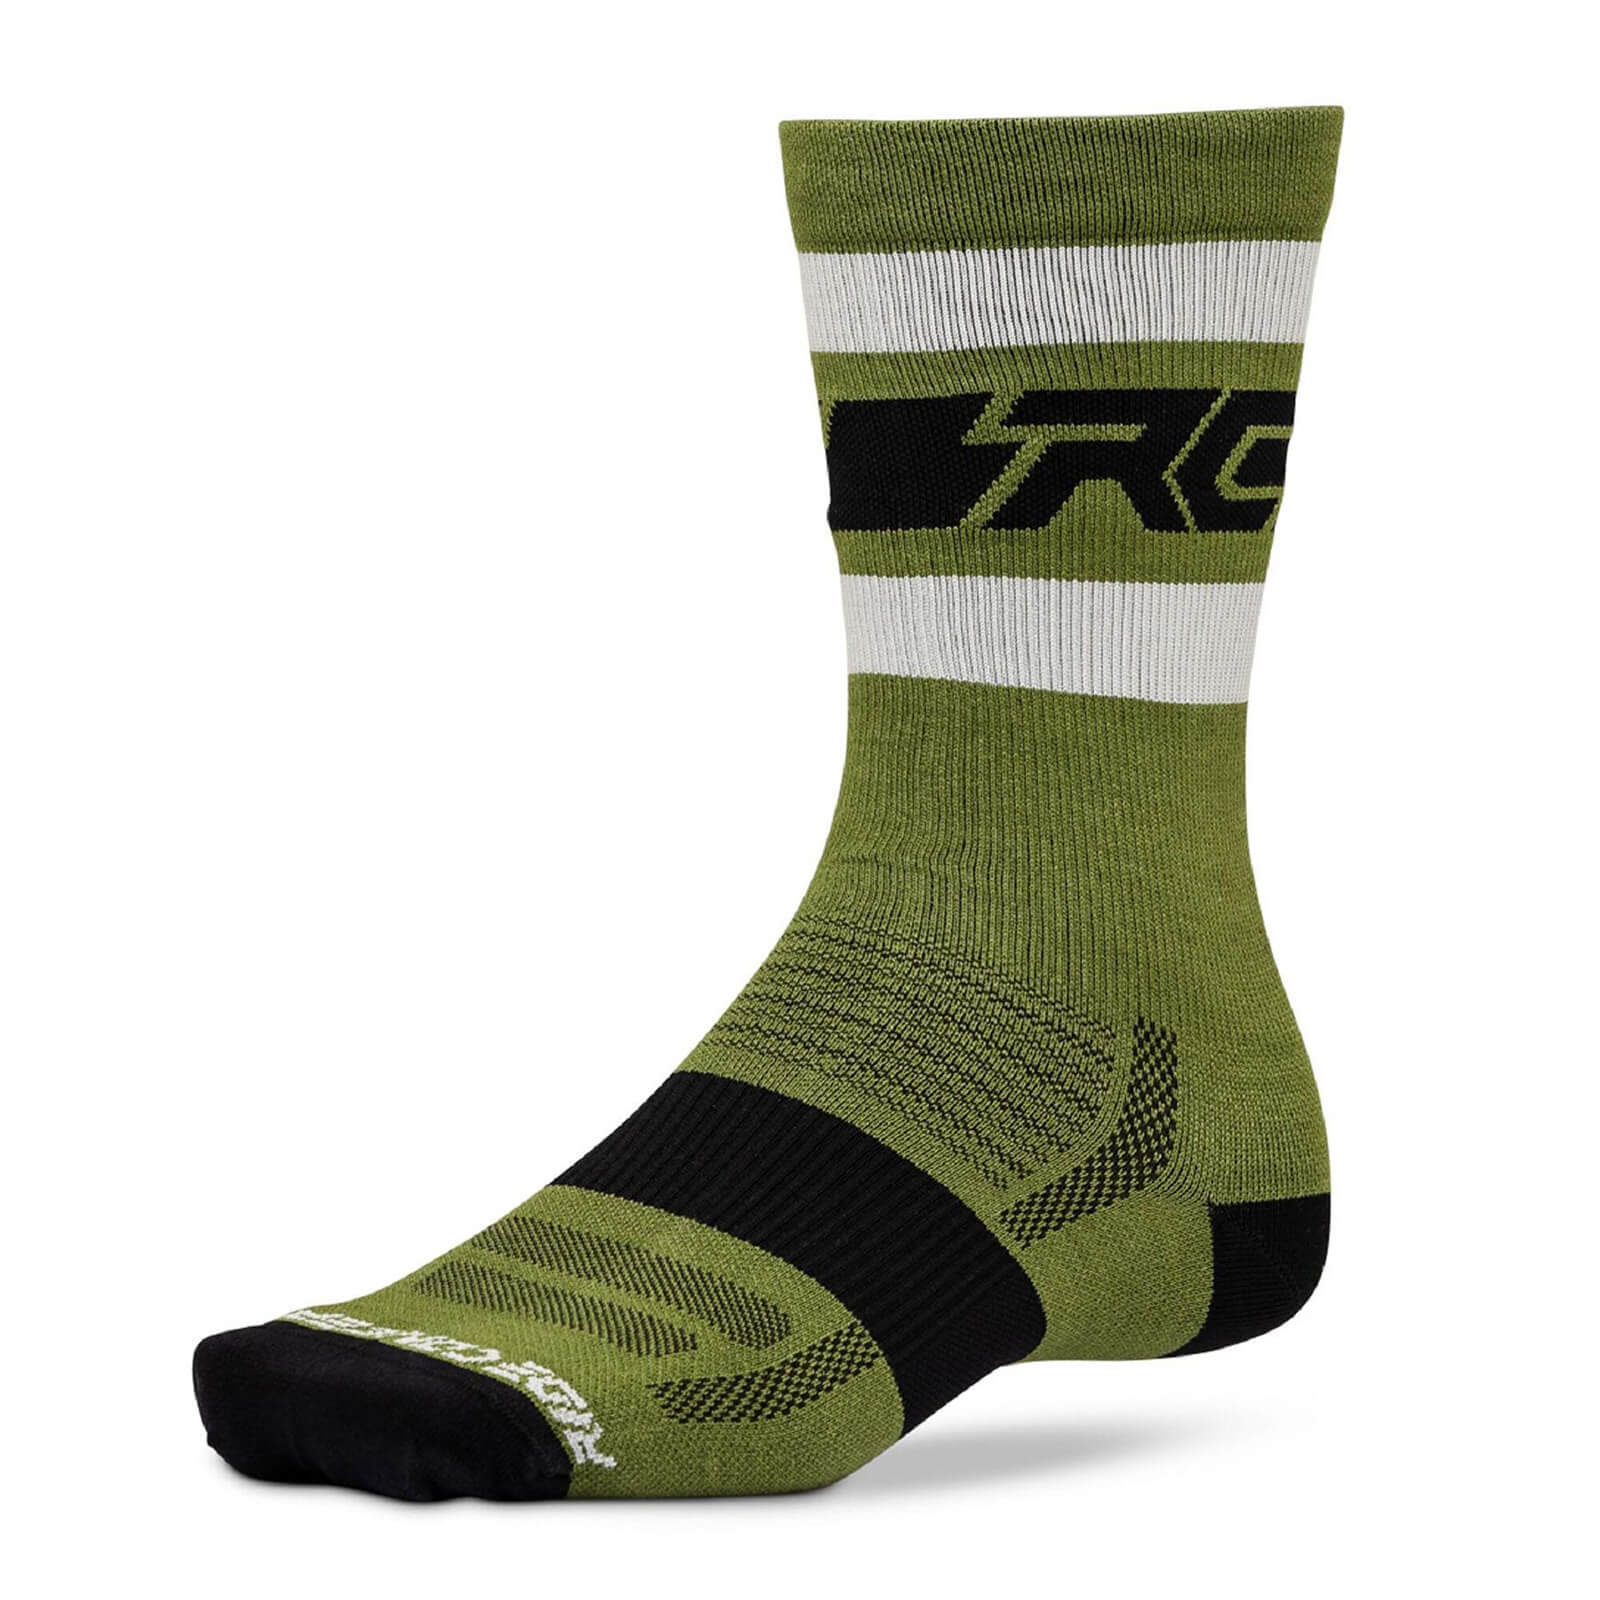 Ride Concepts Fifty/Fifty MTB Socks - M - Olive